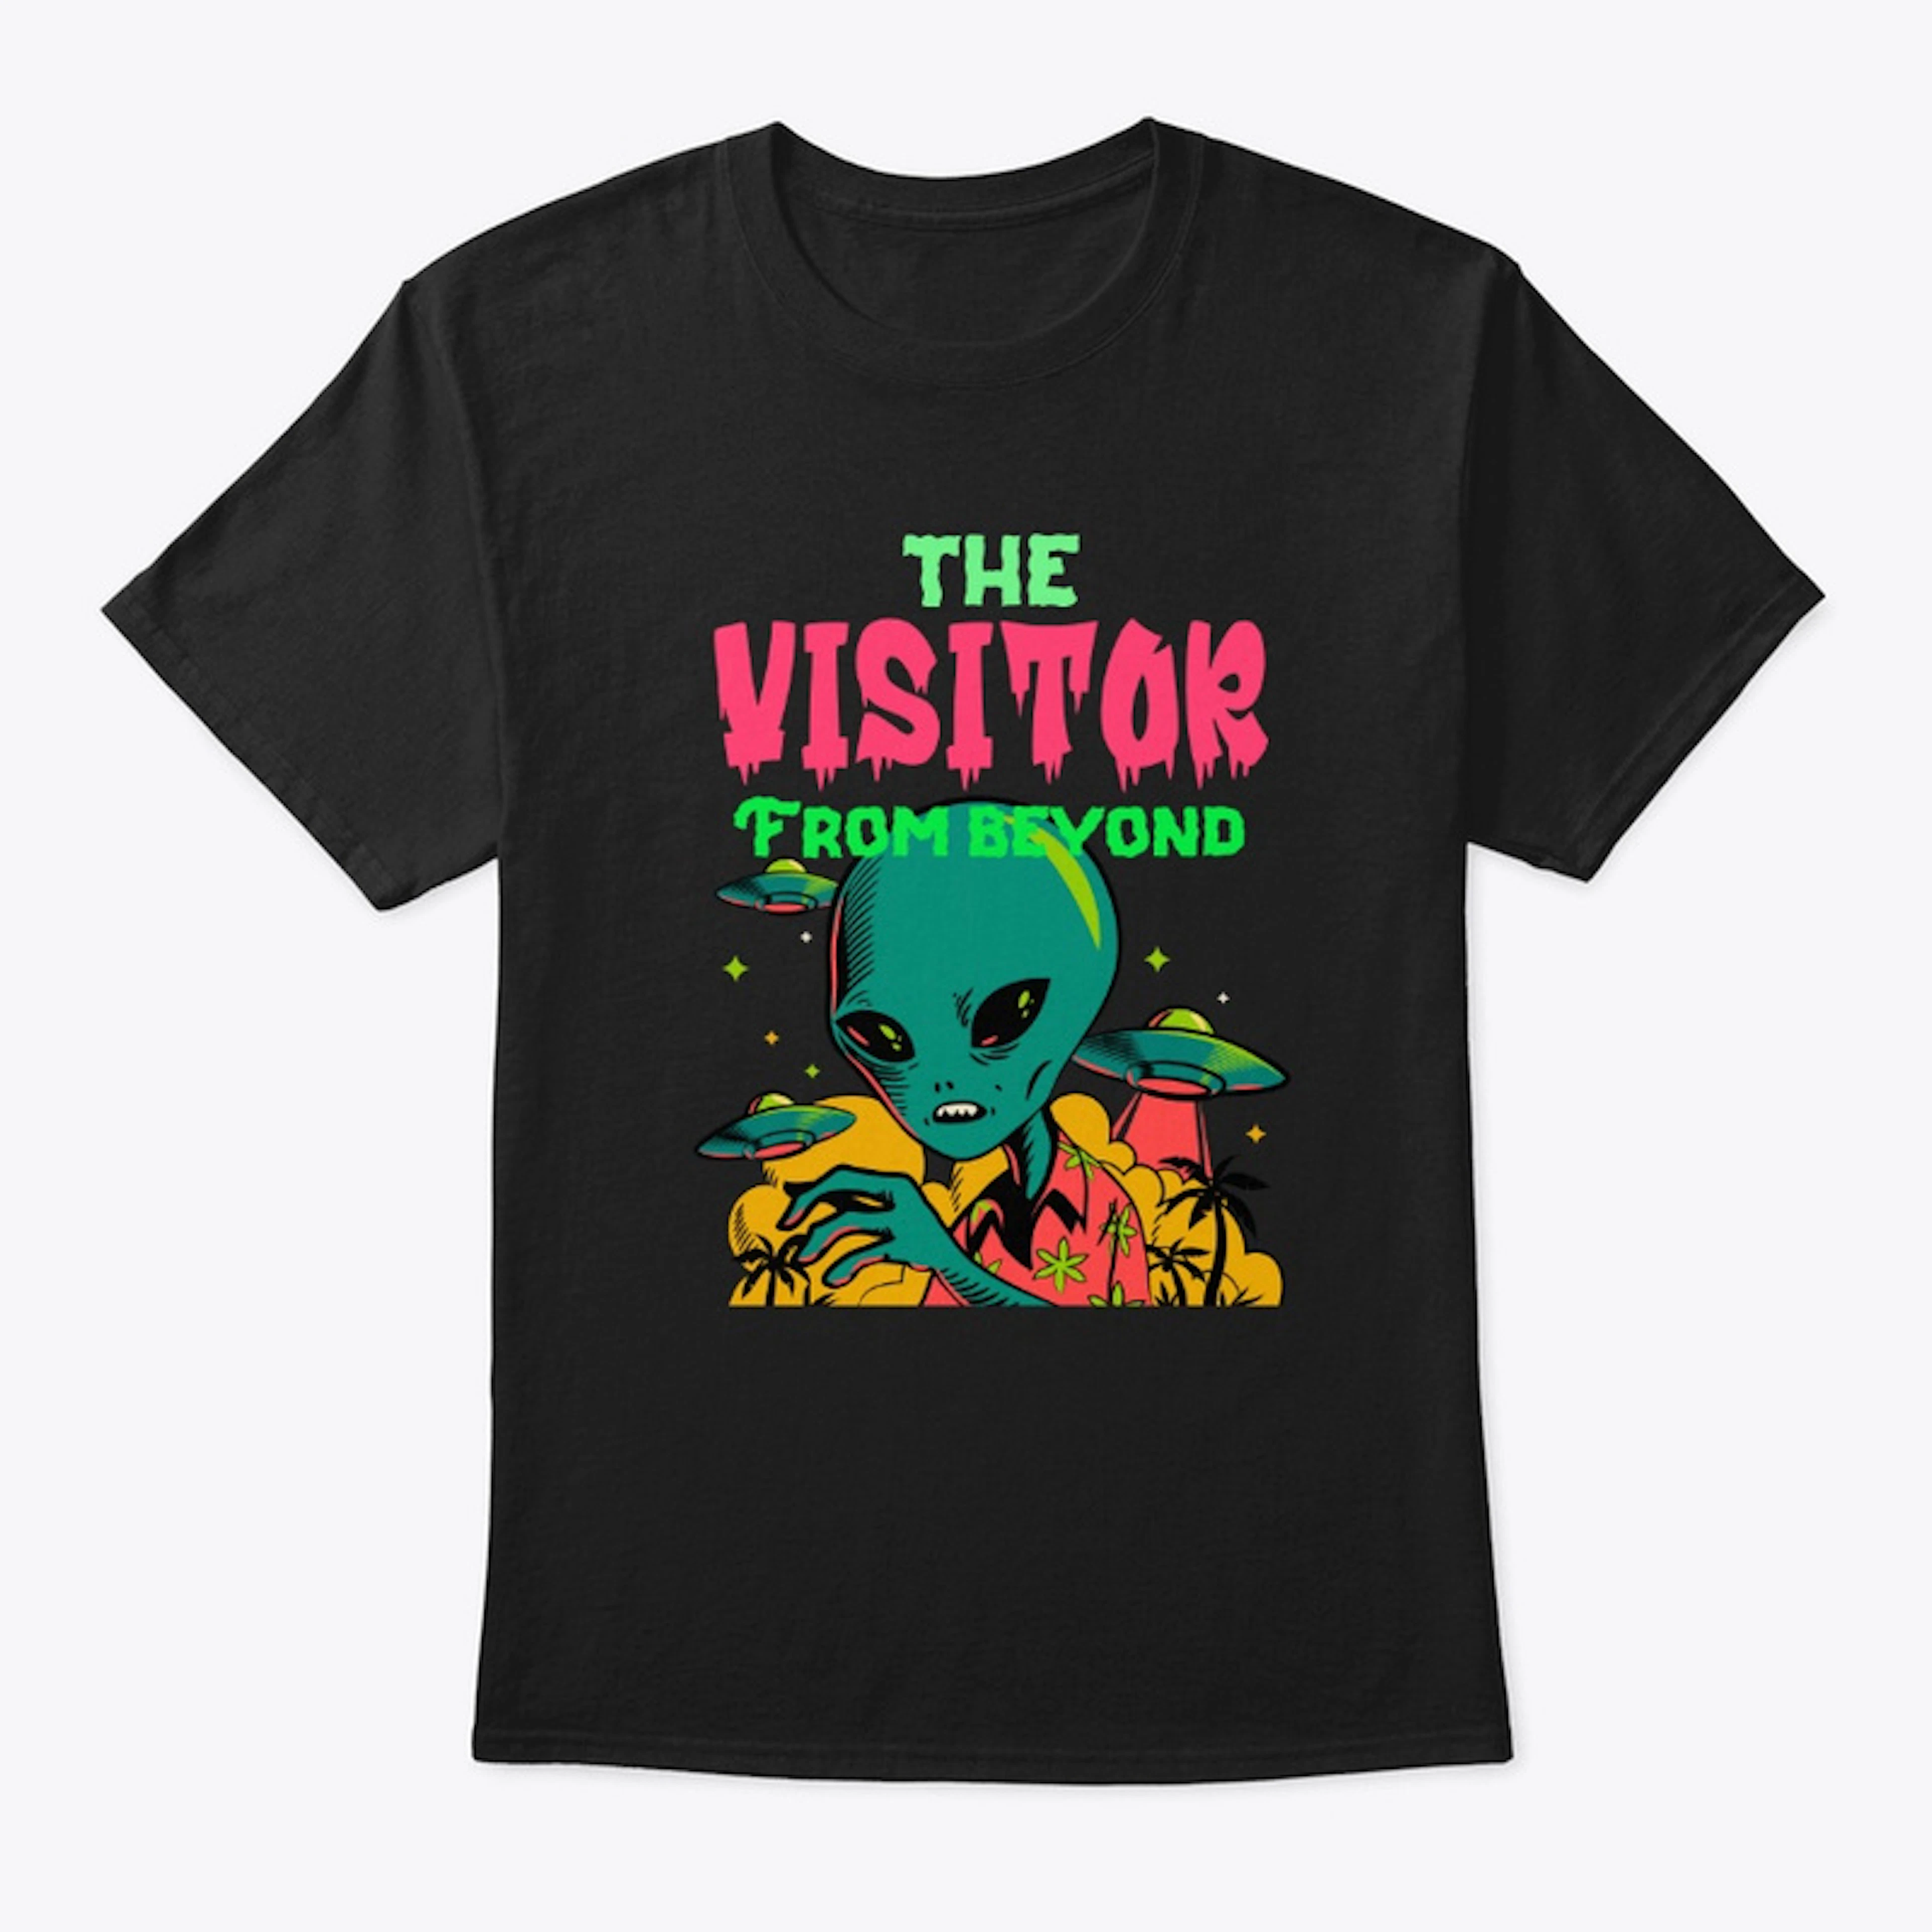 THE VISITOR FROM BEYOND